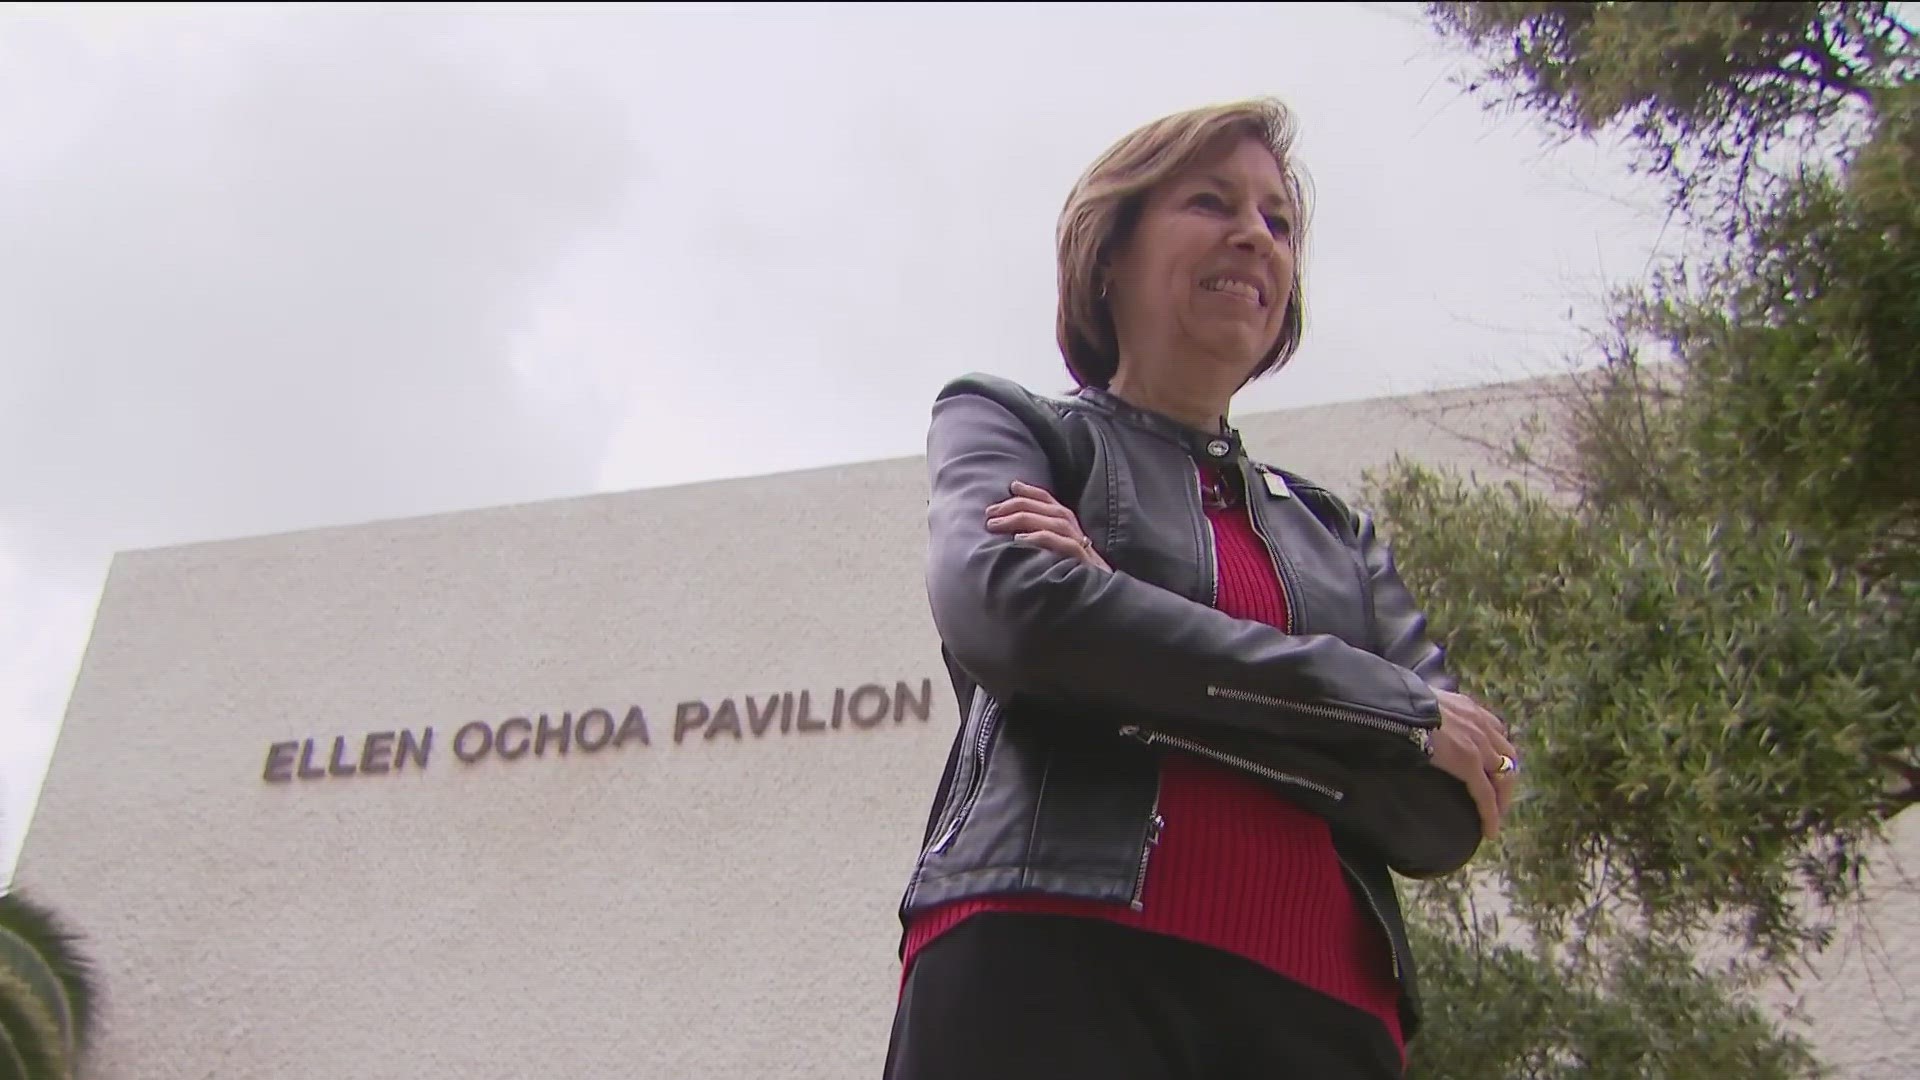 Ochoa graduated from SDSU in 1980 and went on to be the first Latina in space.